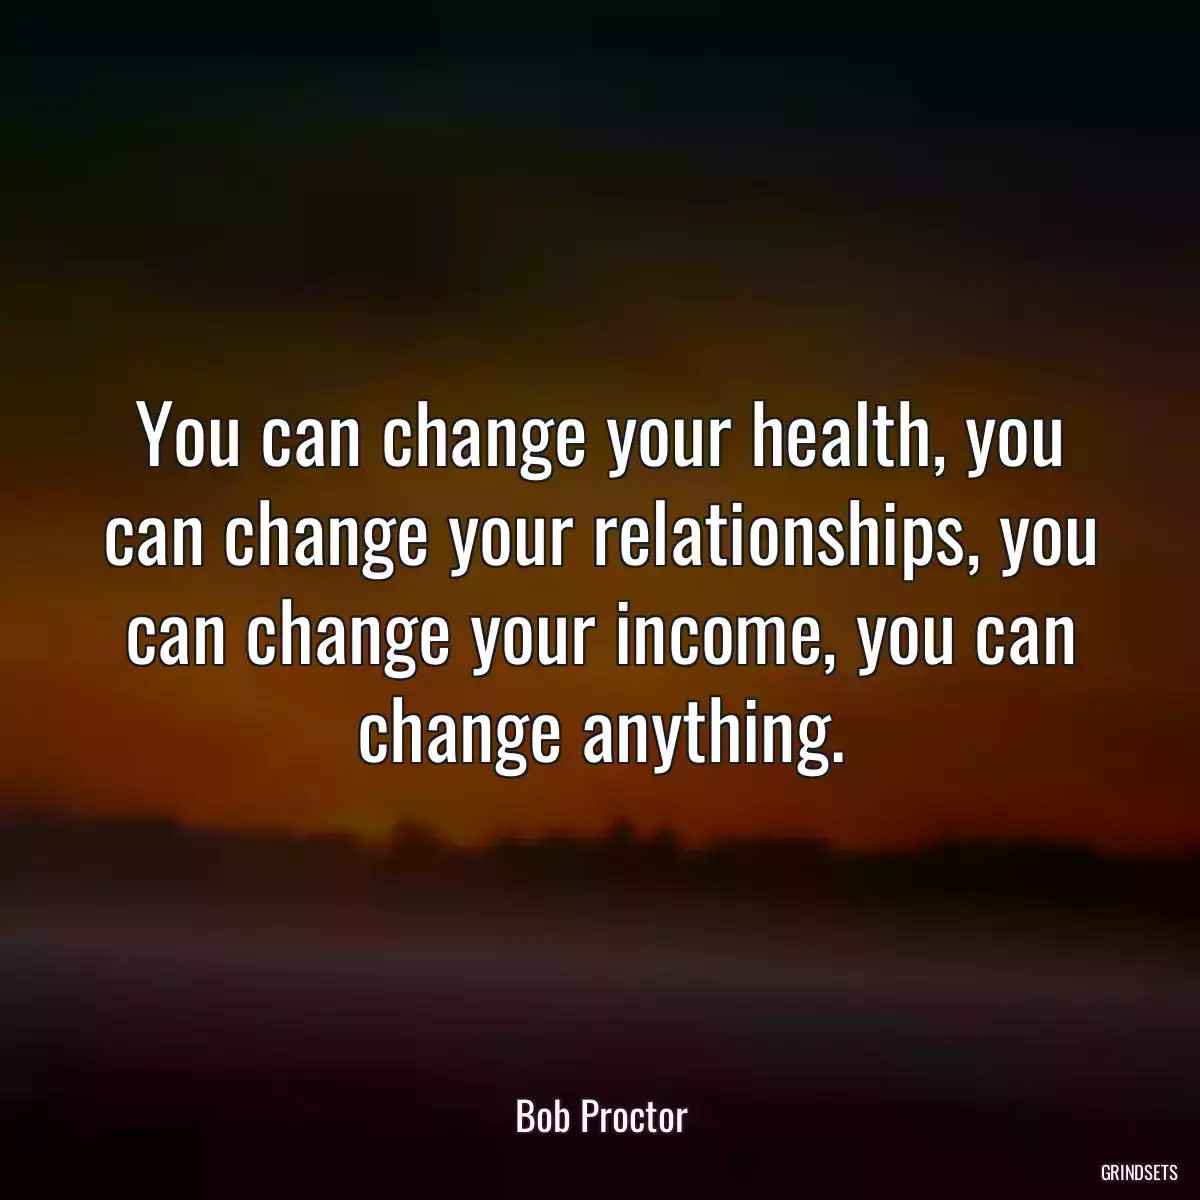 You can change your health, you can change your relationships, you can change your income, you can change anything.